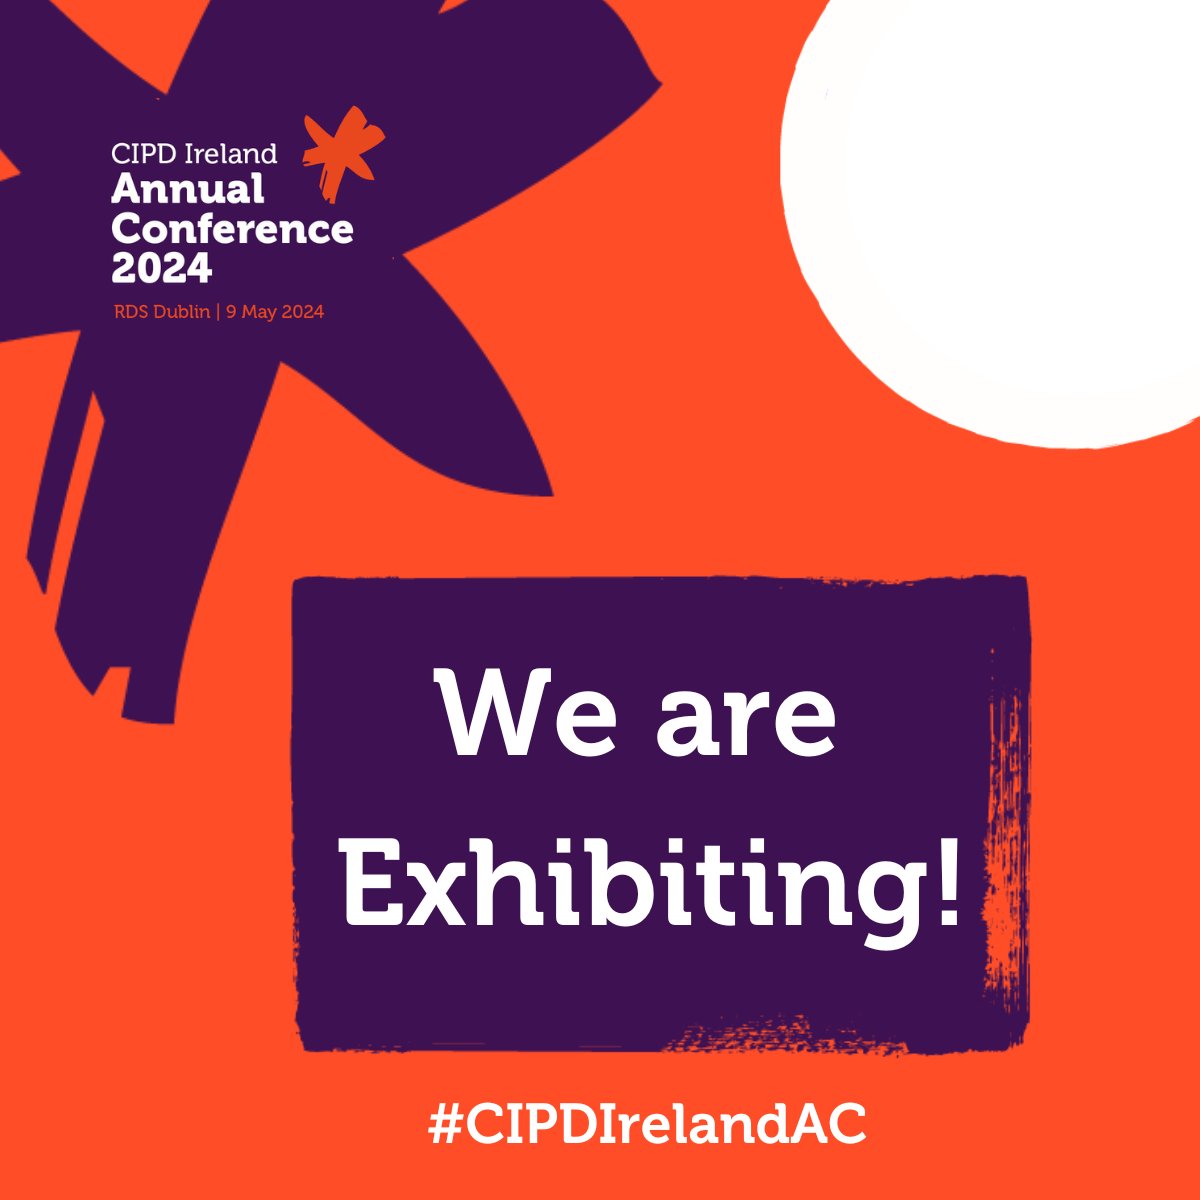 We are delighted to meet attendees at the @cipdireland Annual Conference 2024 in the RDS today. Come and chat to our team at stand A24 about the CIPD courses in #HR & #LearningandDevelopment available at National College of Ireland: bit.ly/4b3feg0 #CIPDIrelandAC